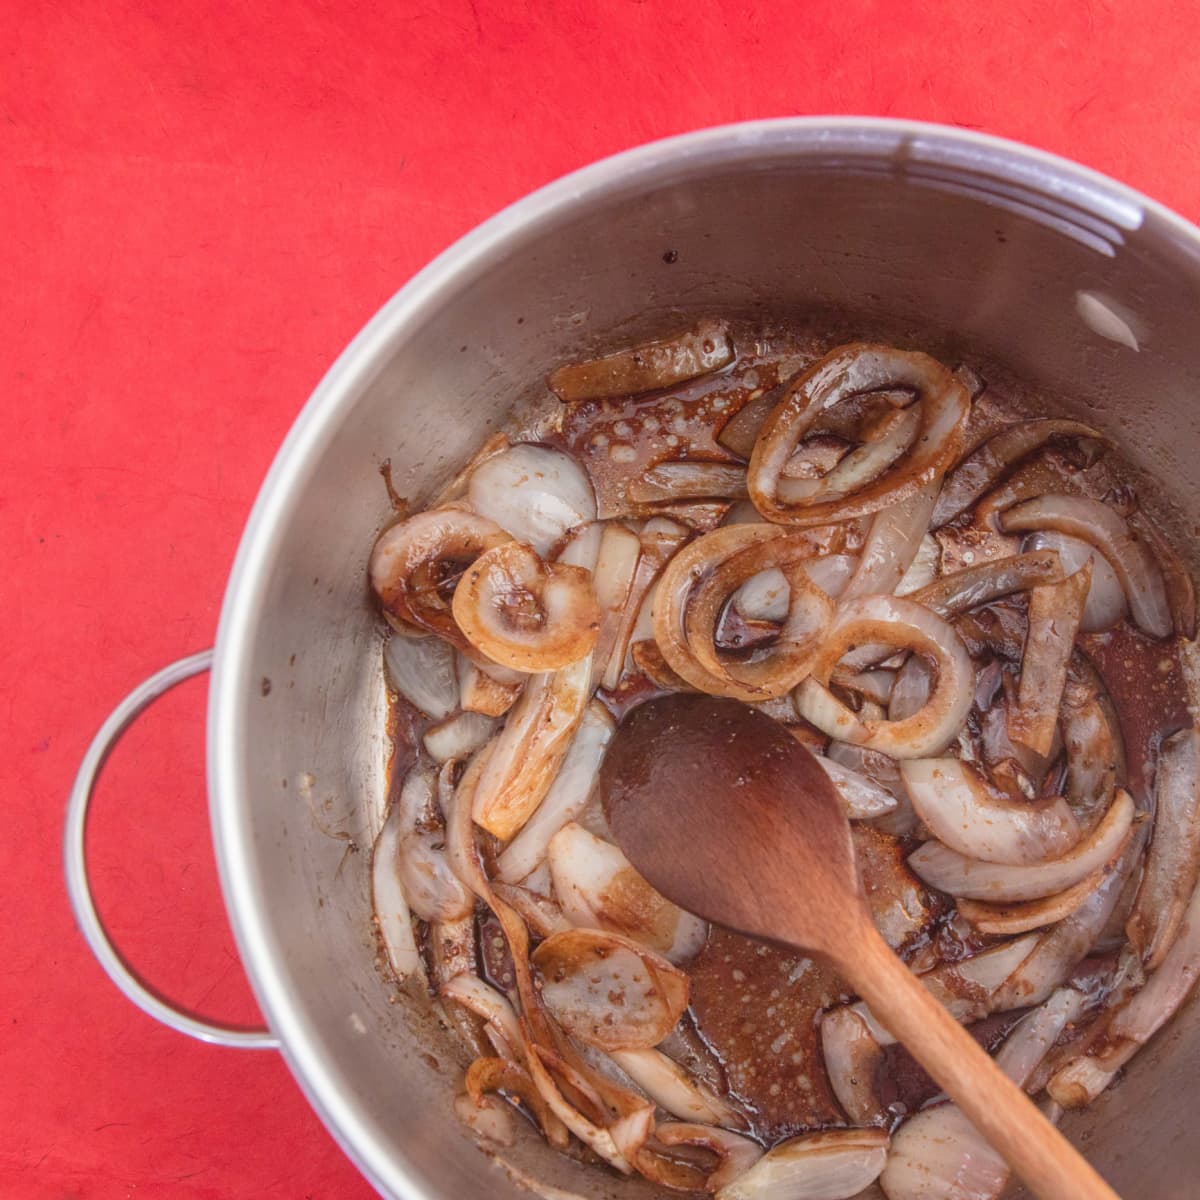 Onions being caramelized in a pan